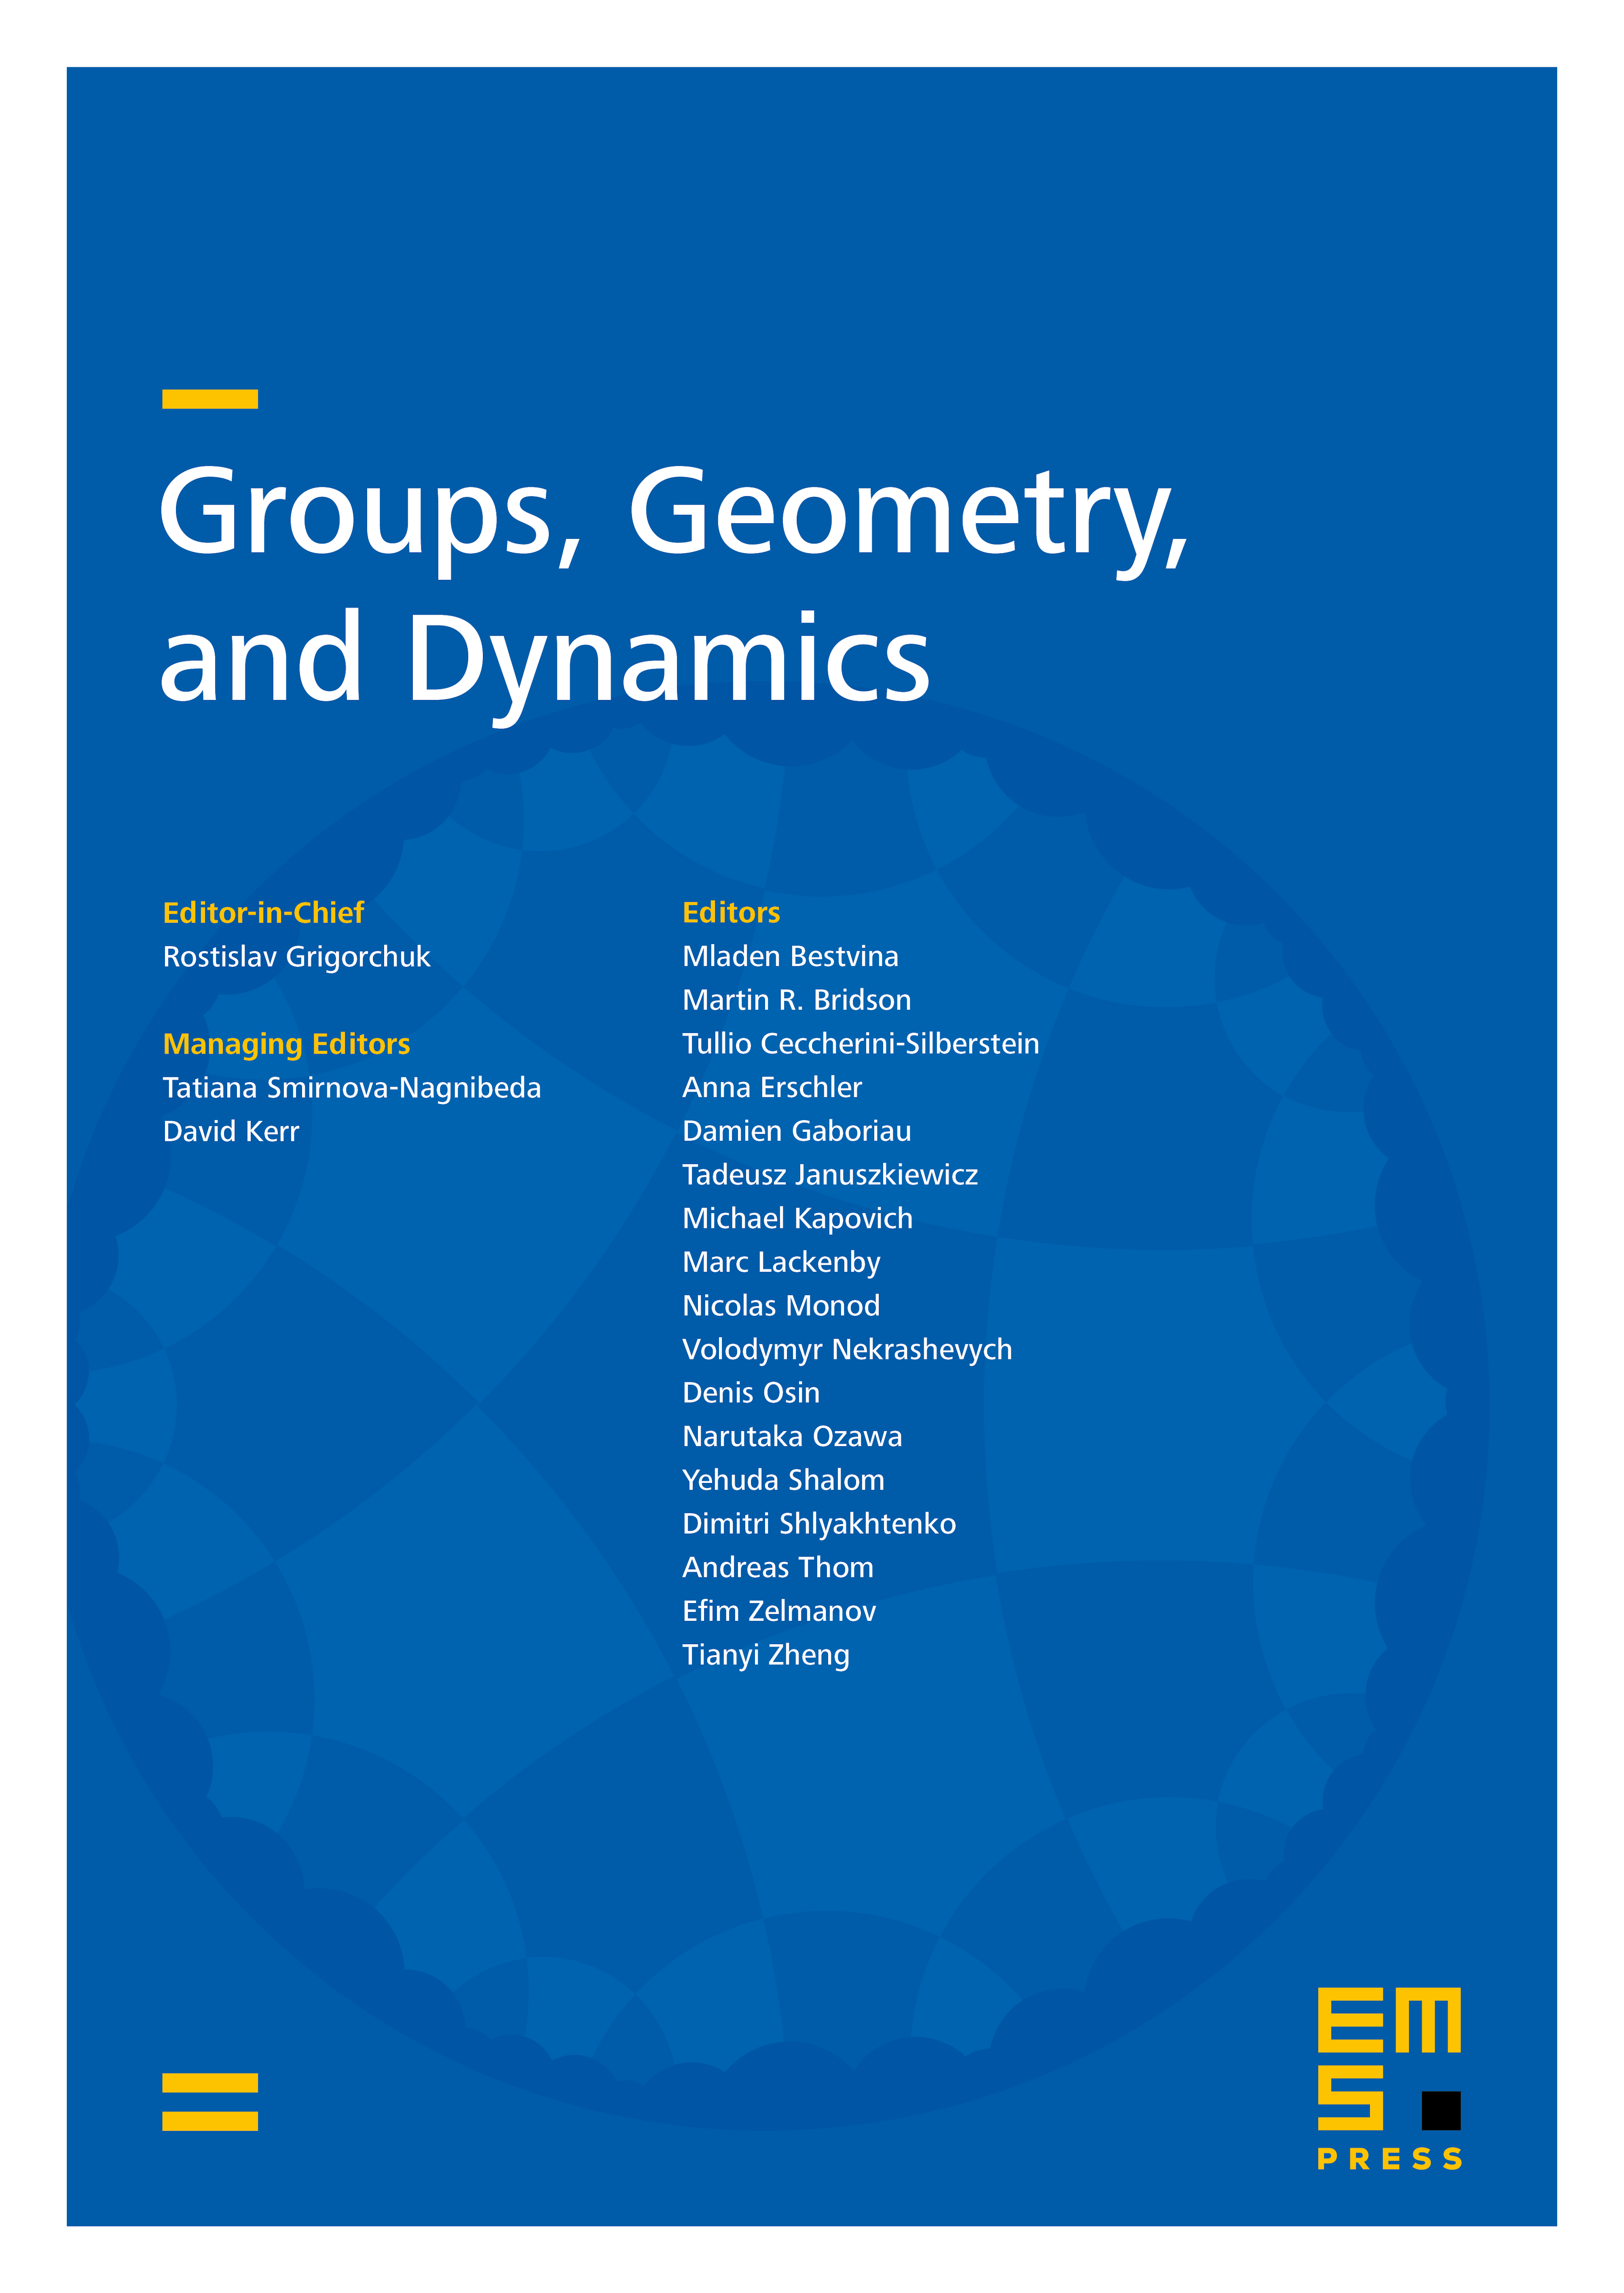 Powers in finite groups cover